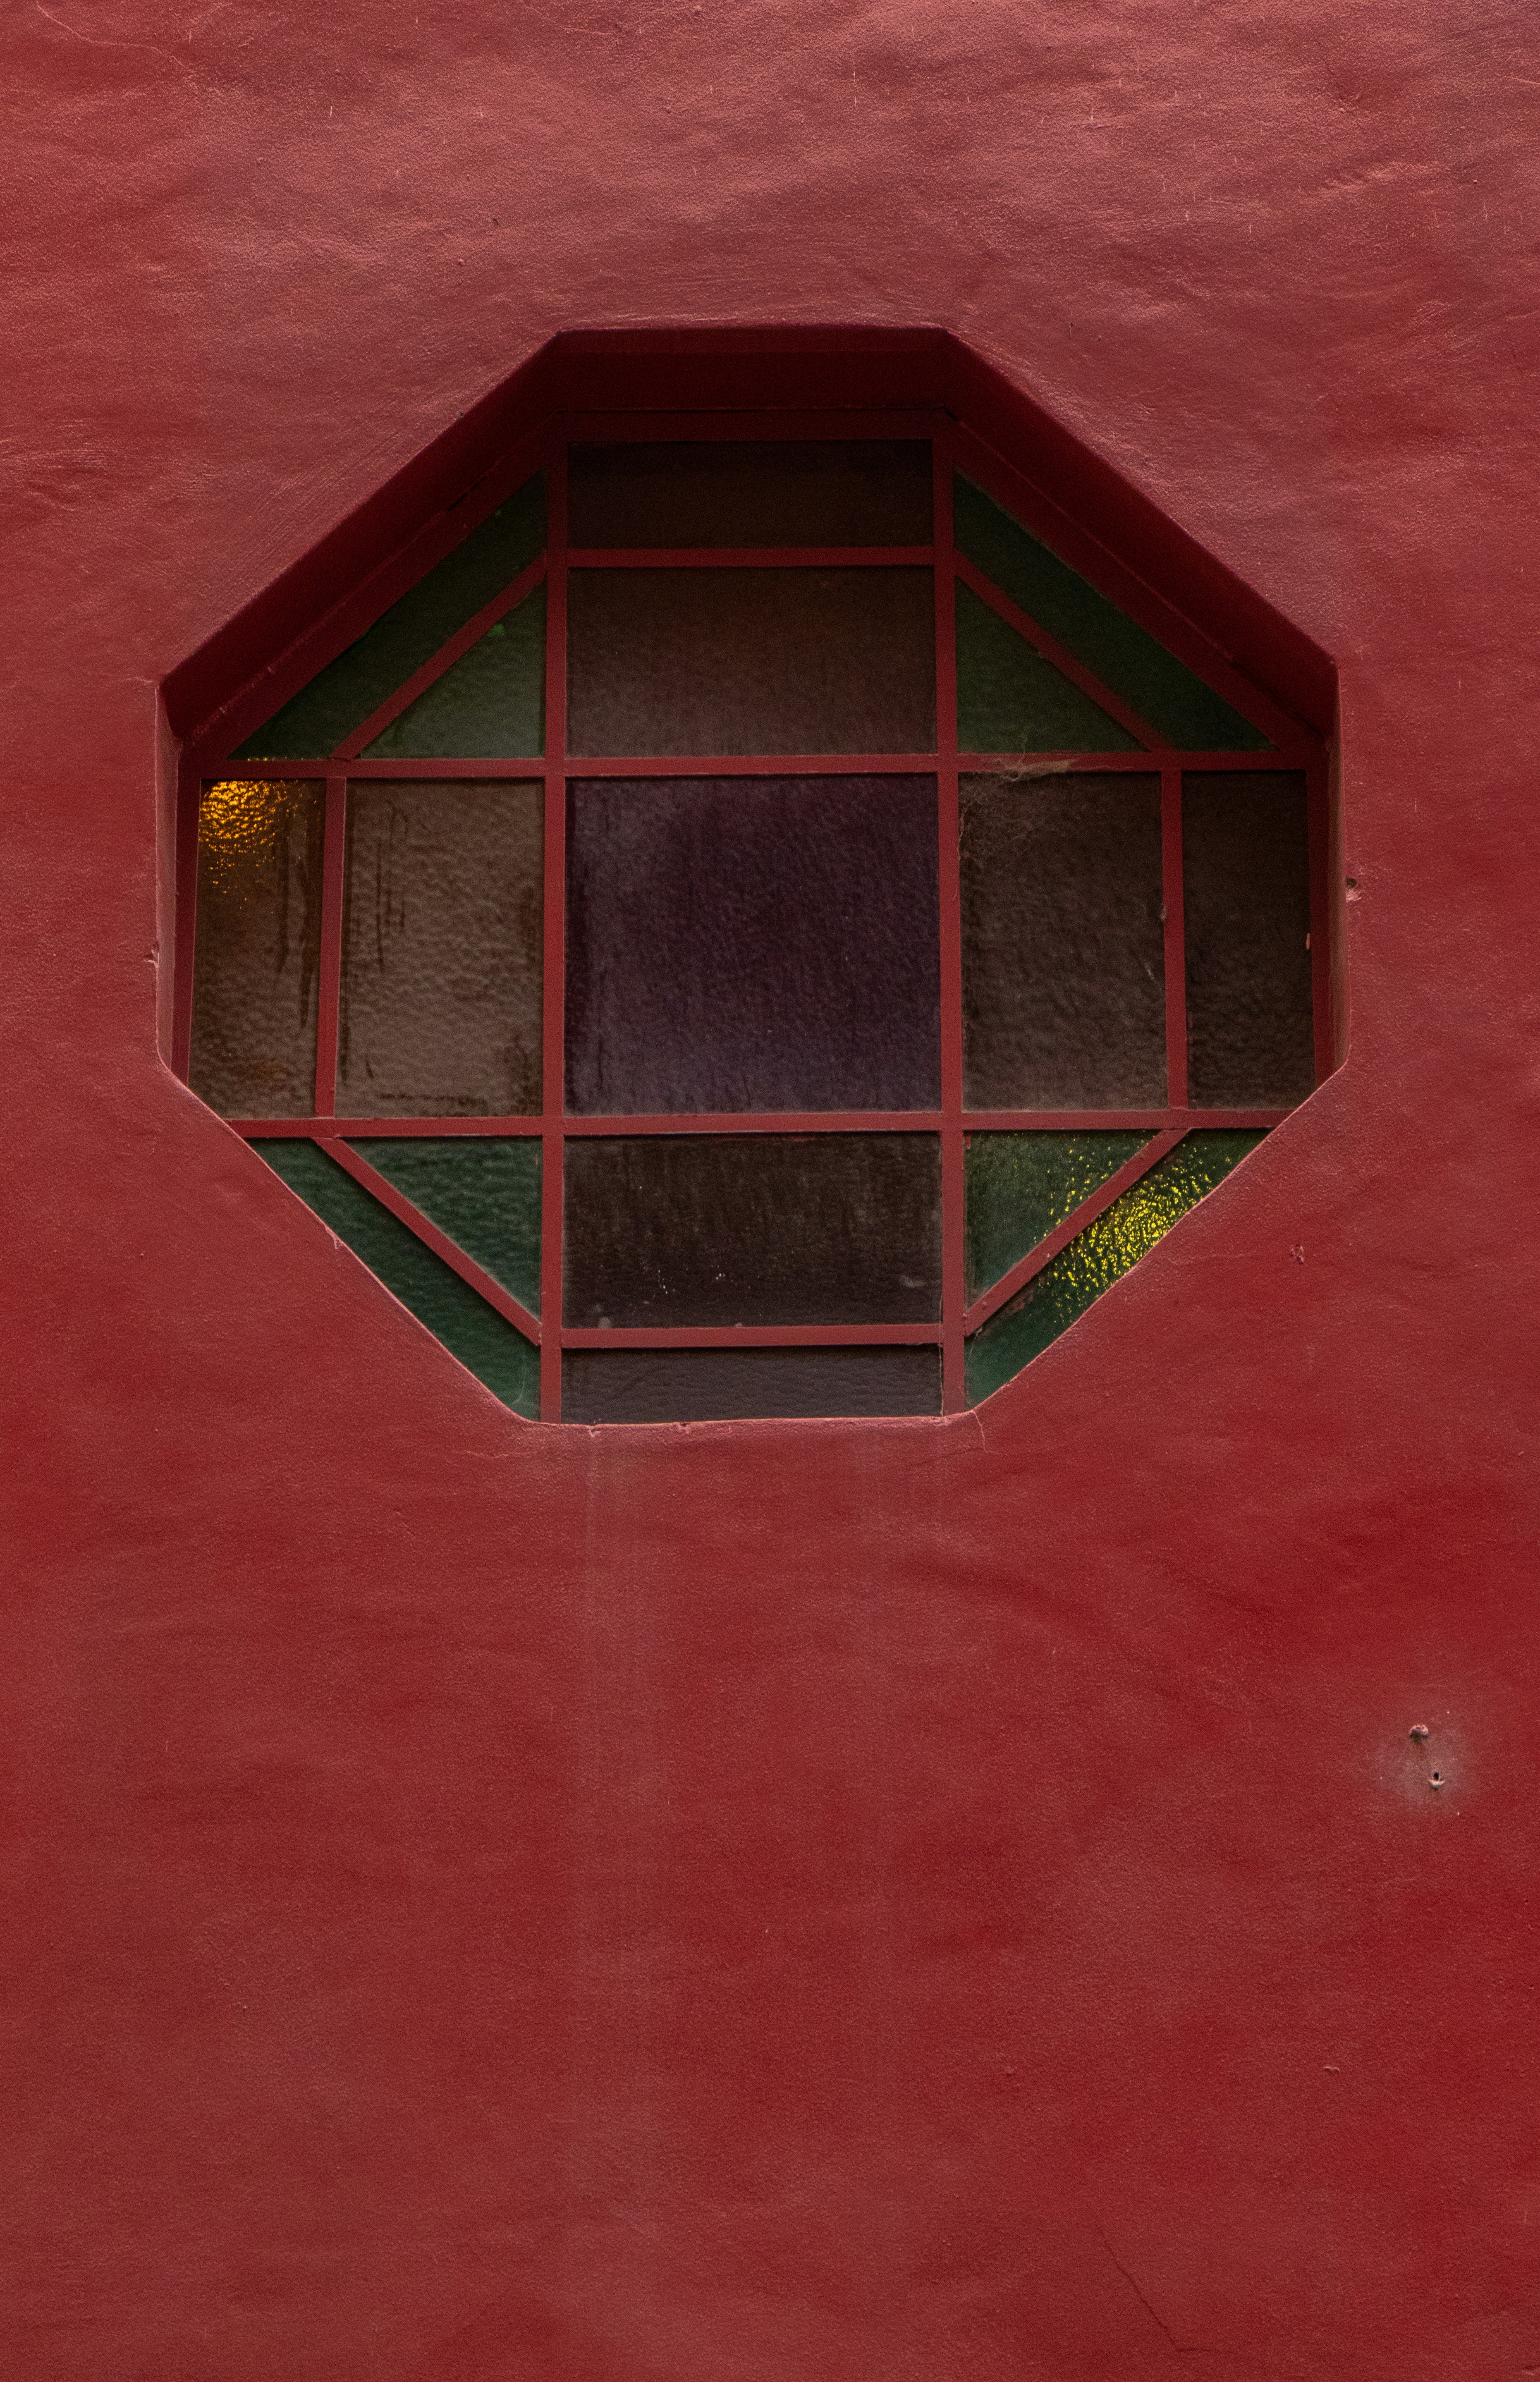 Window on a red wall